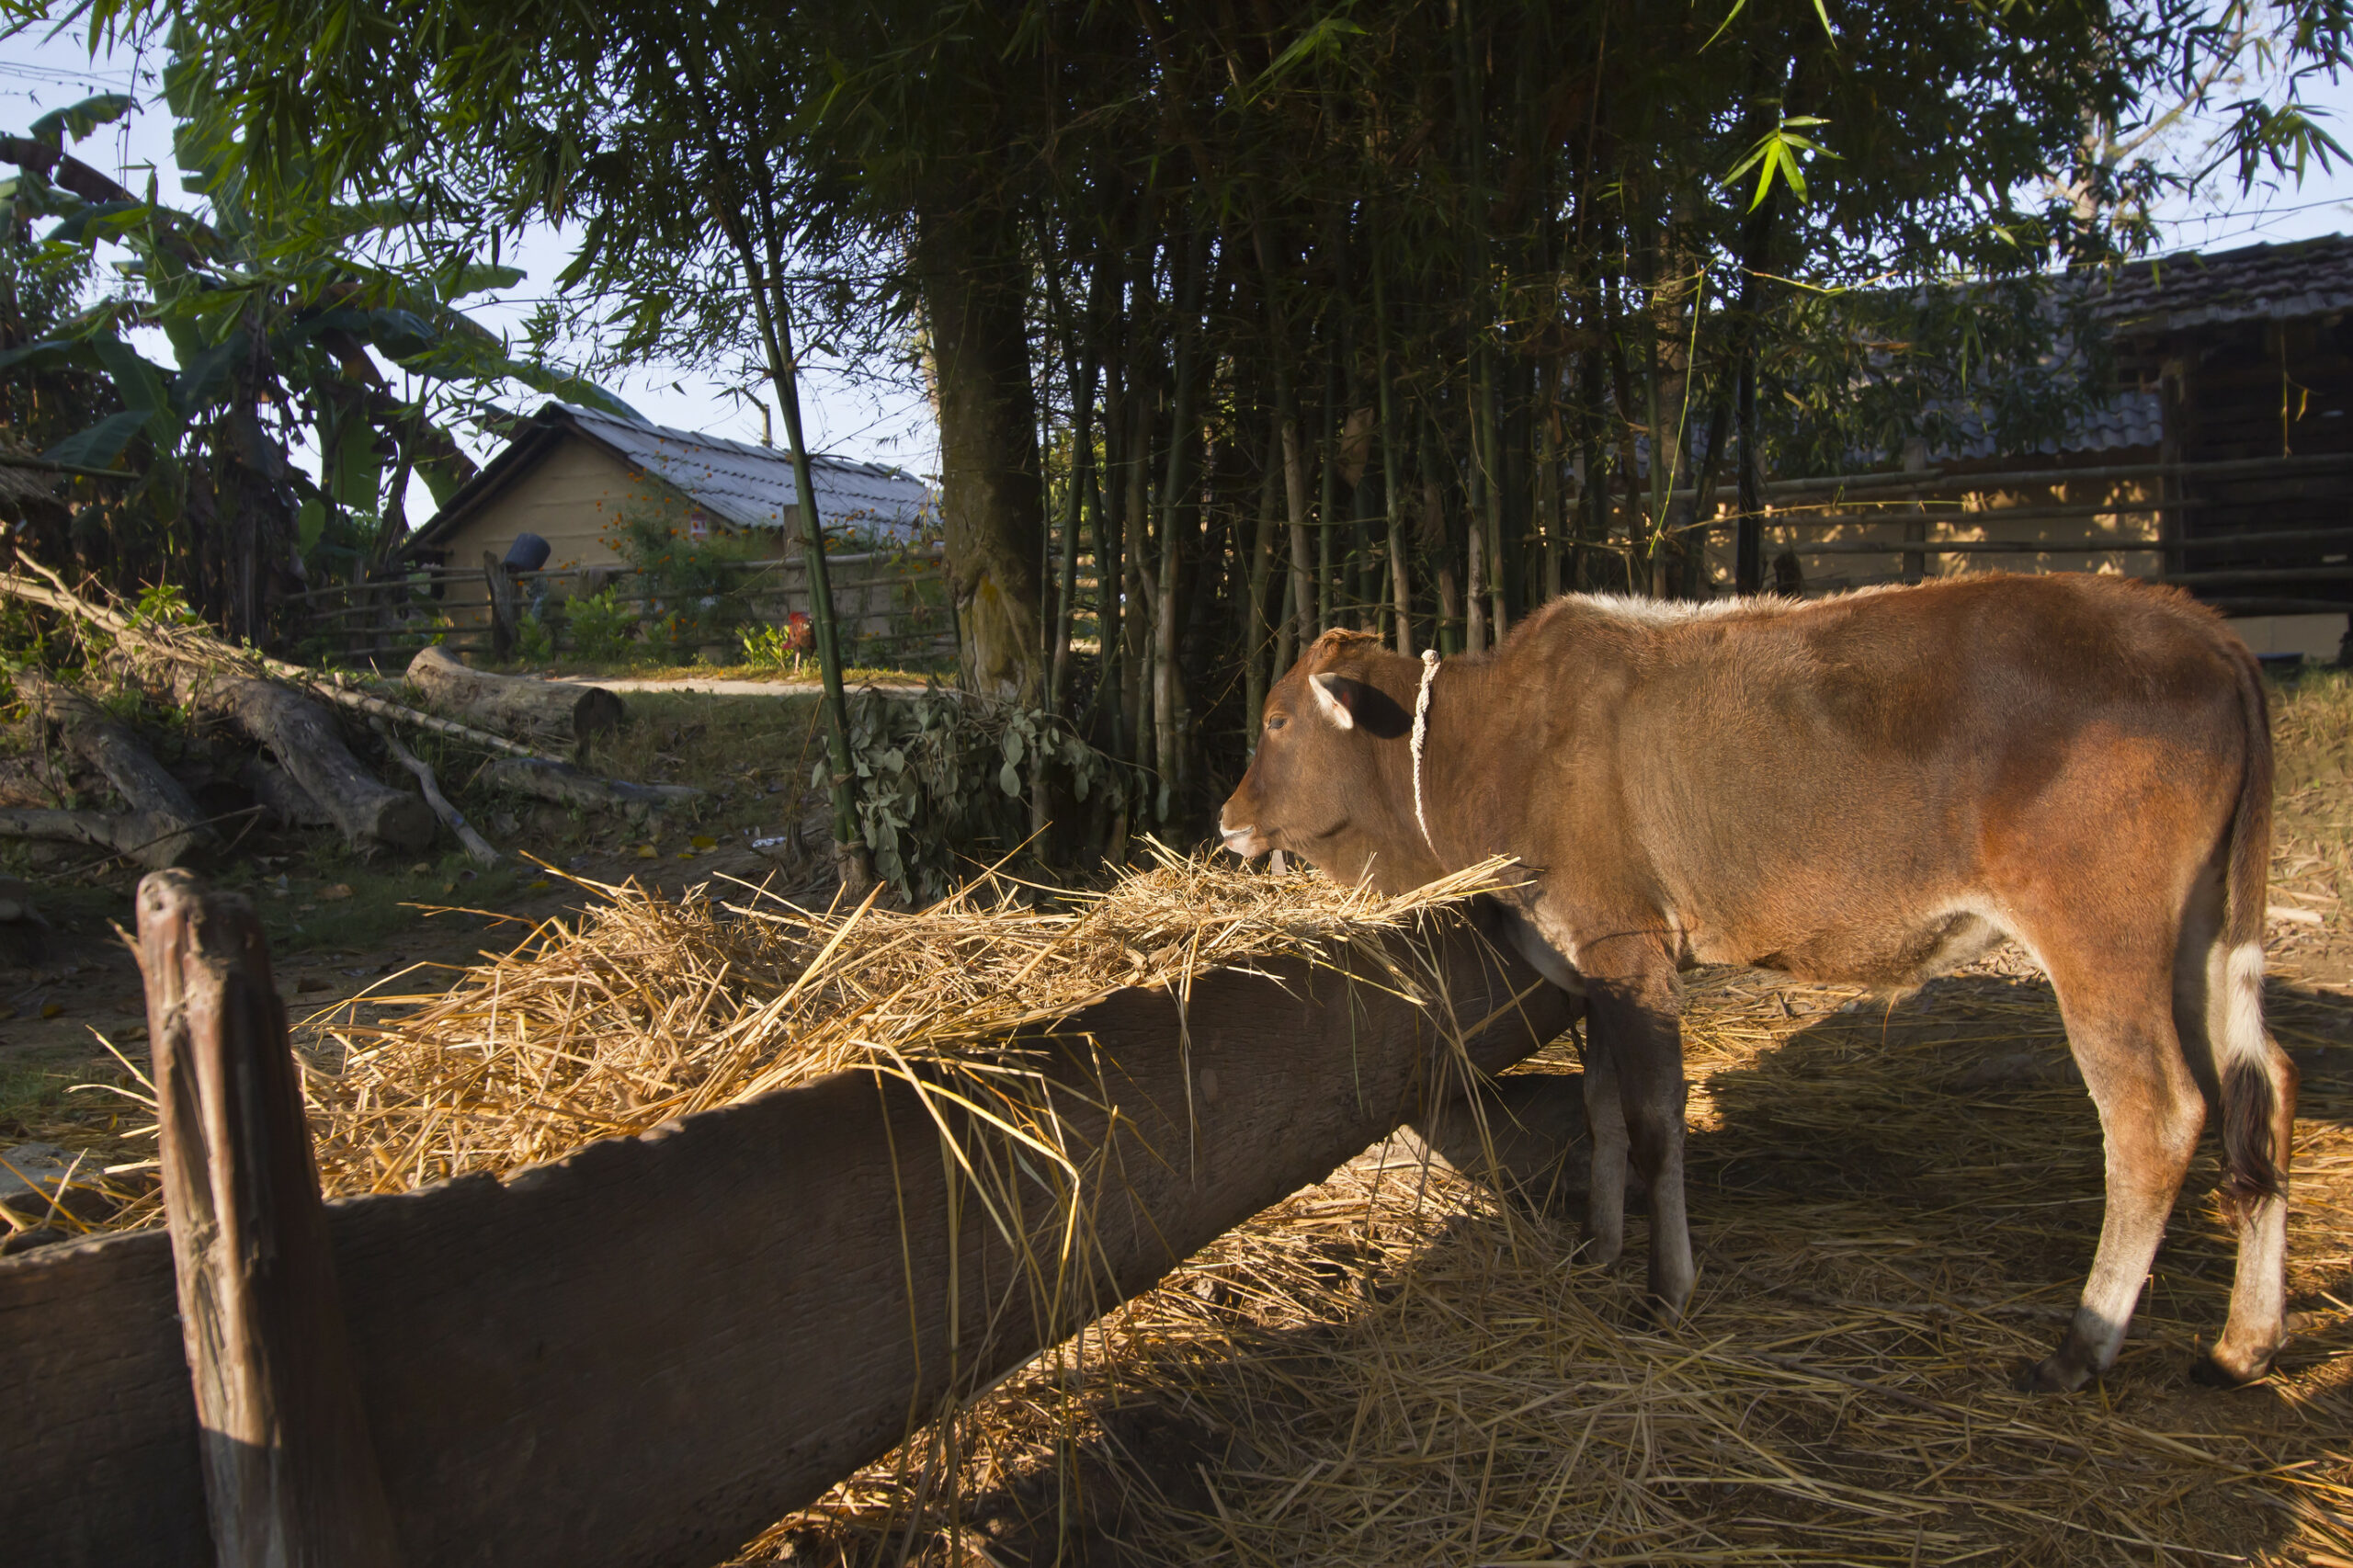 Cattle farming in Nepal: Why farmers cry - Dairy Global